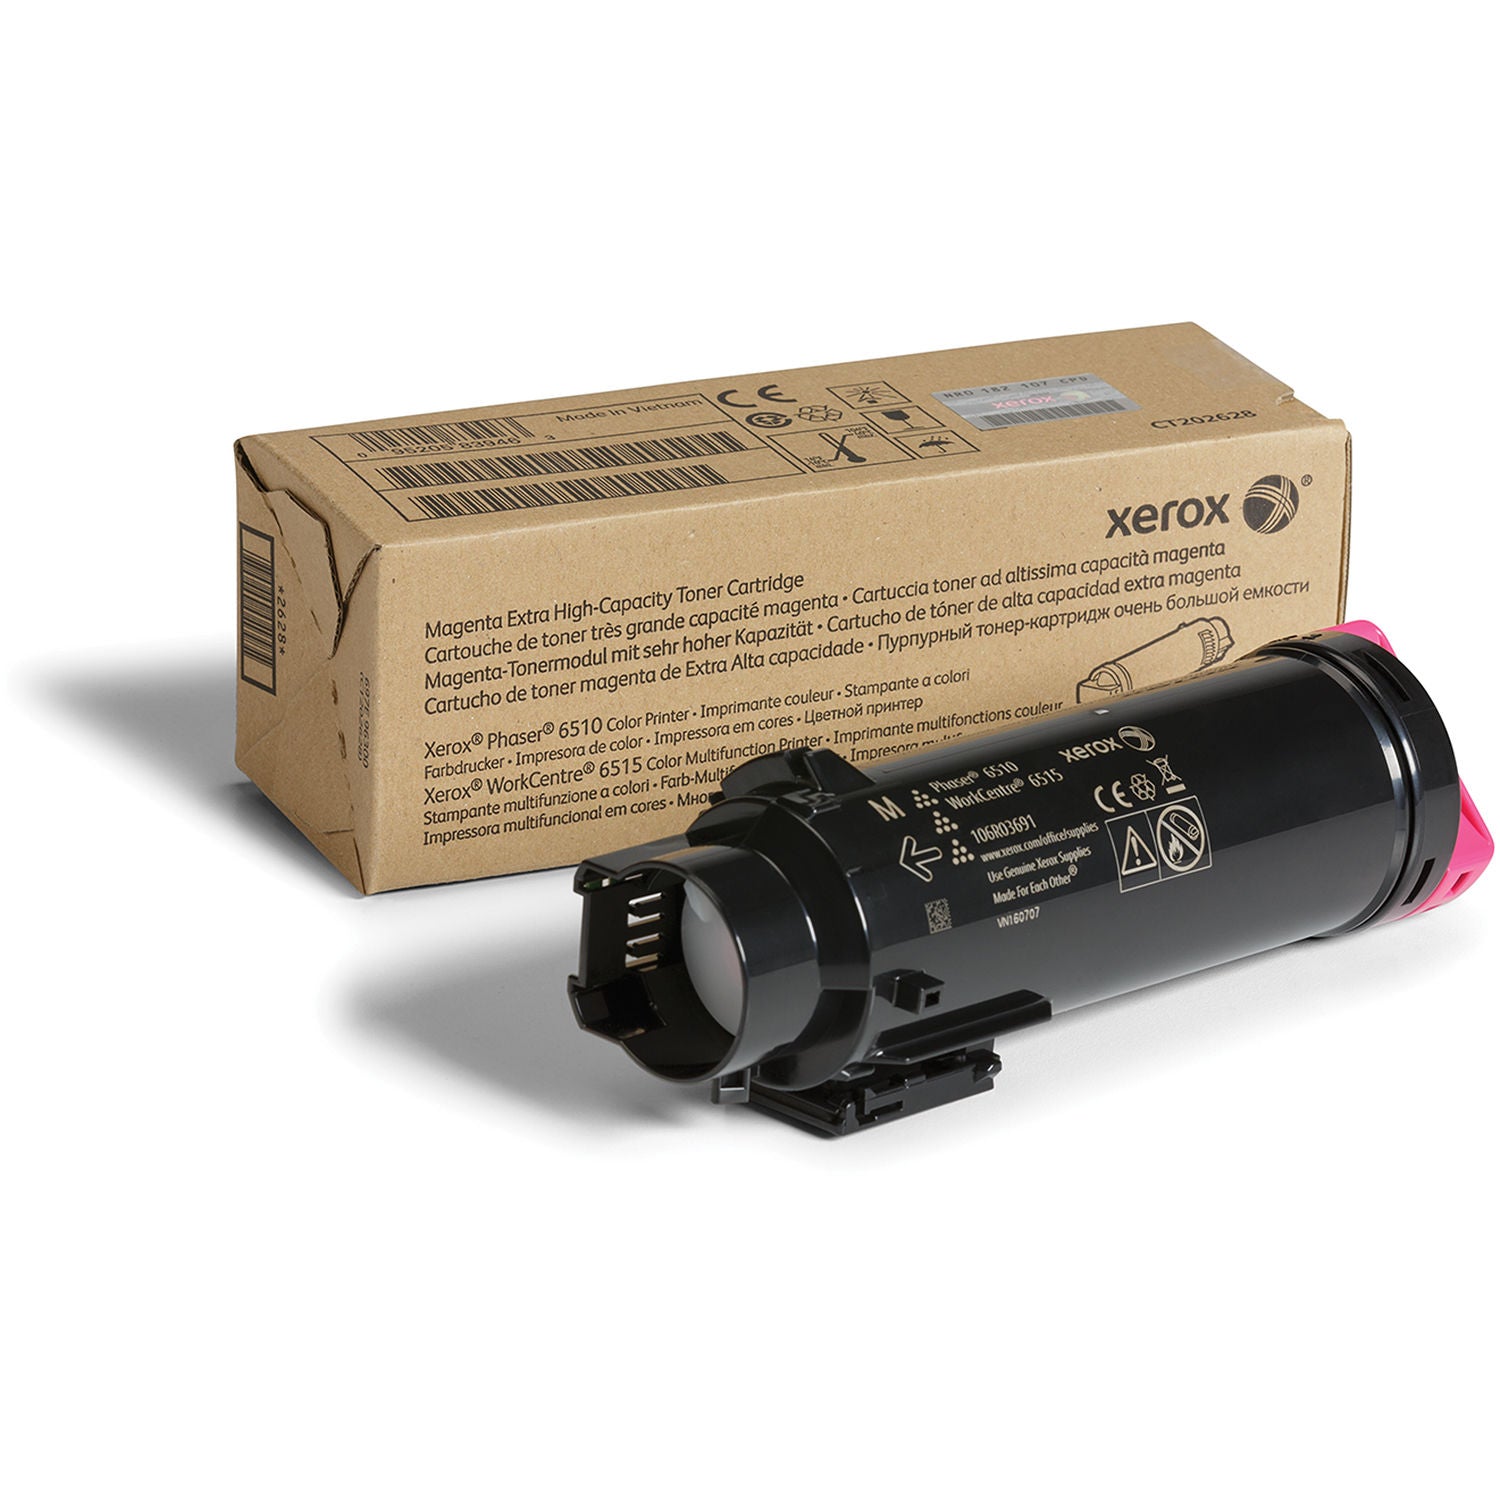 Xerox Magenta High Capacity Toner Cartridge 4.3k pages for 6510/ WC6515 - 106R03691 - NWT FM SOLUTIONS - YOUR CATERING WHOLESALER